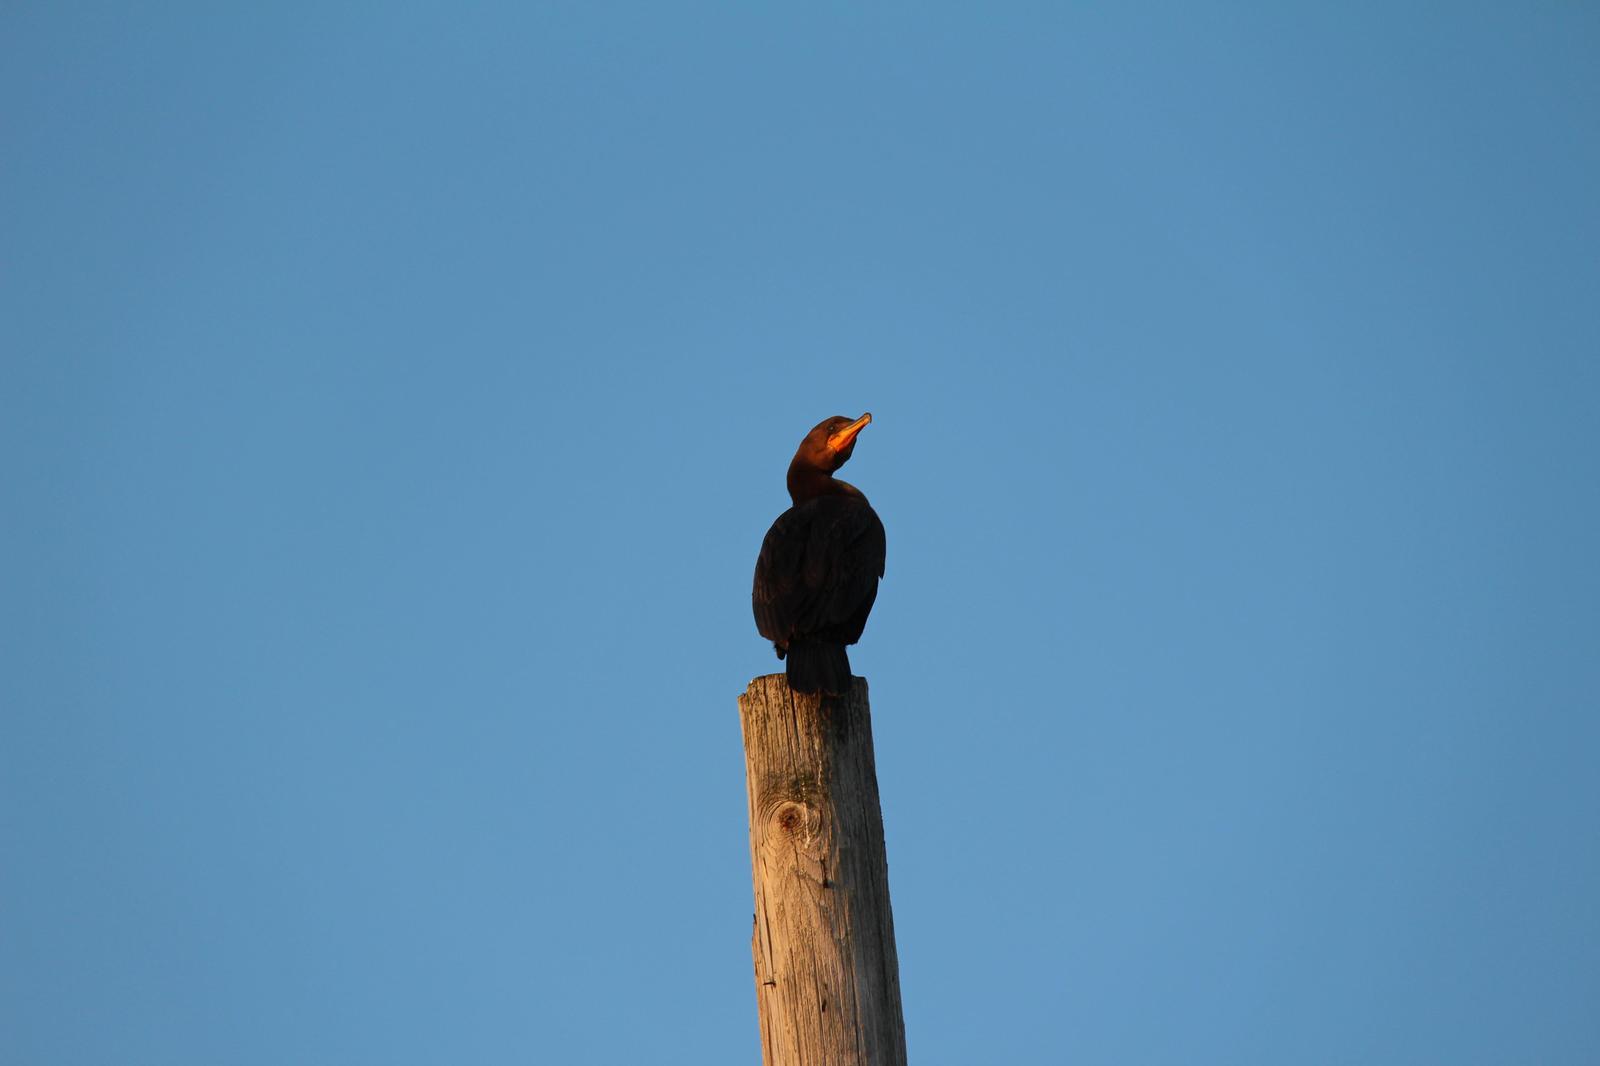 Double-crested Cormorant Photo by Roseanne CALECA